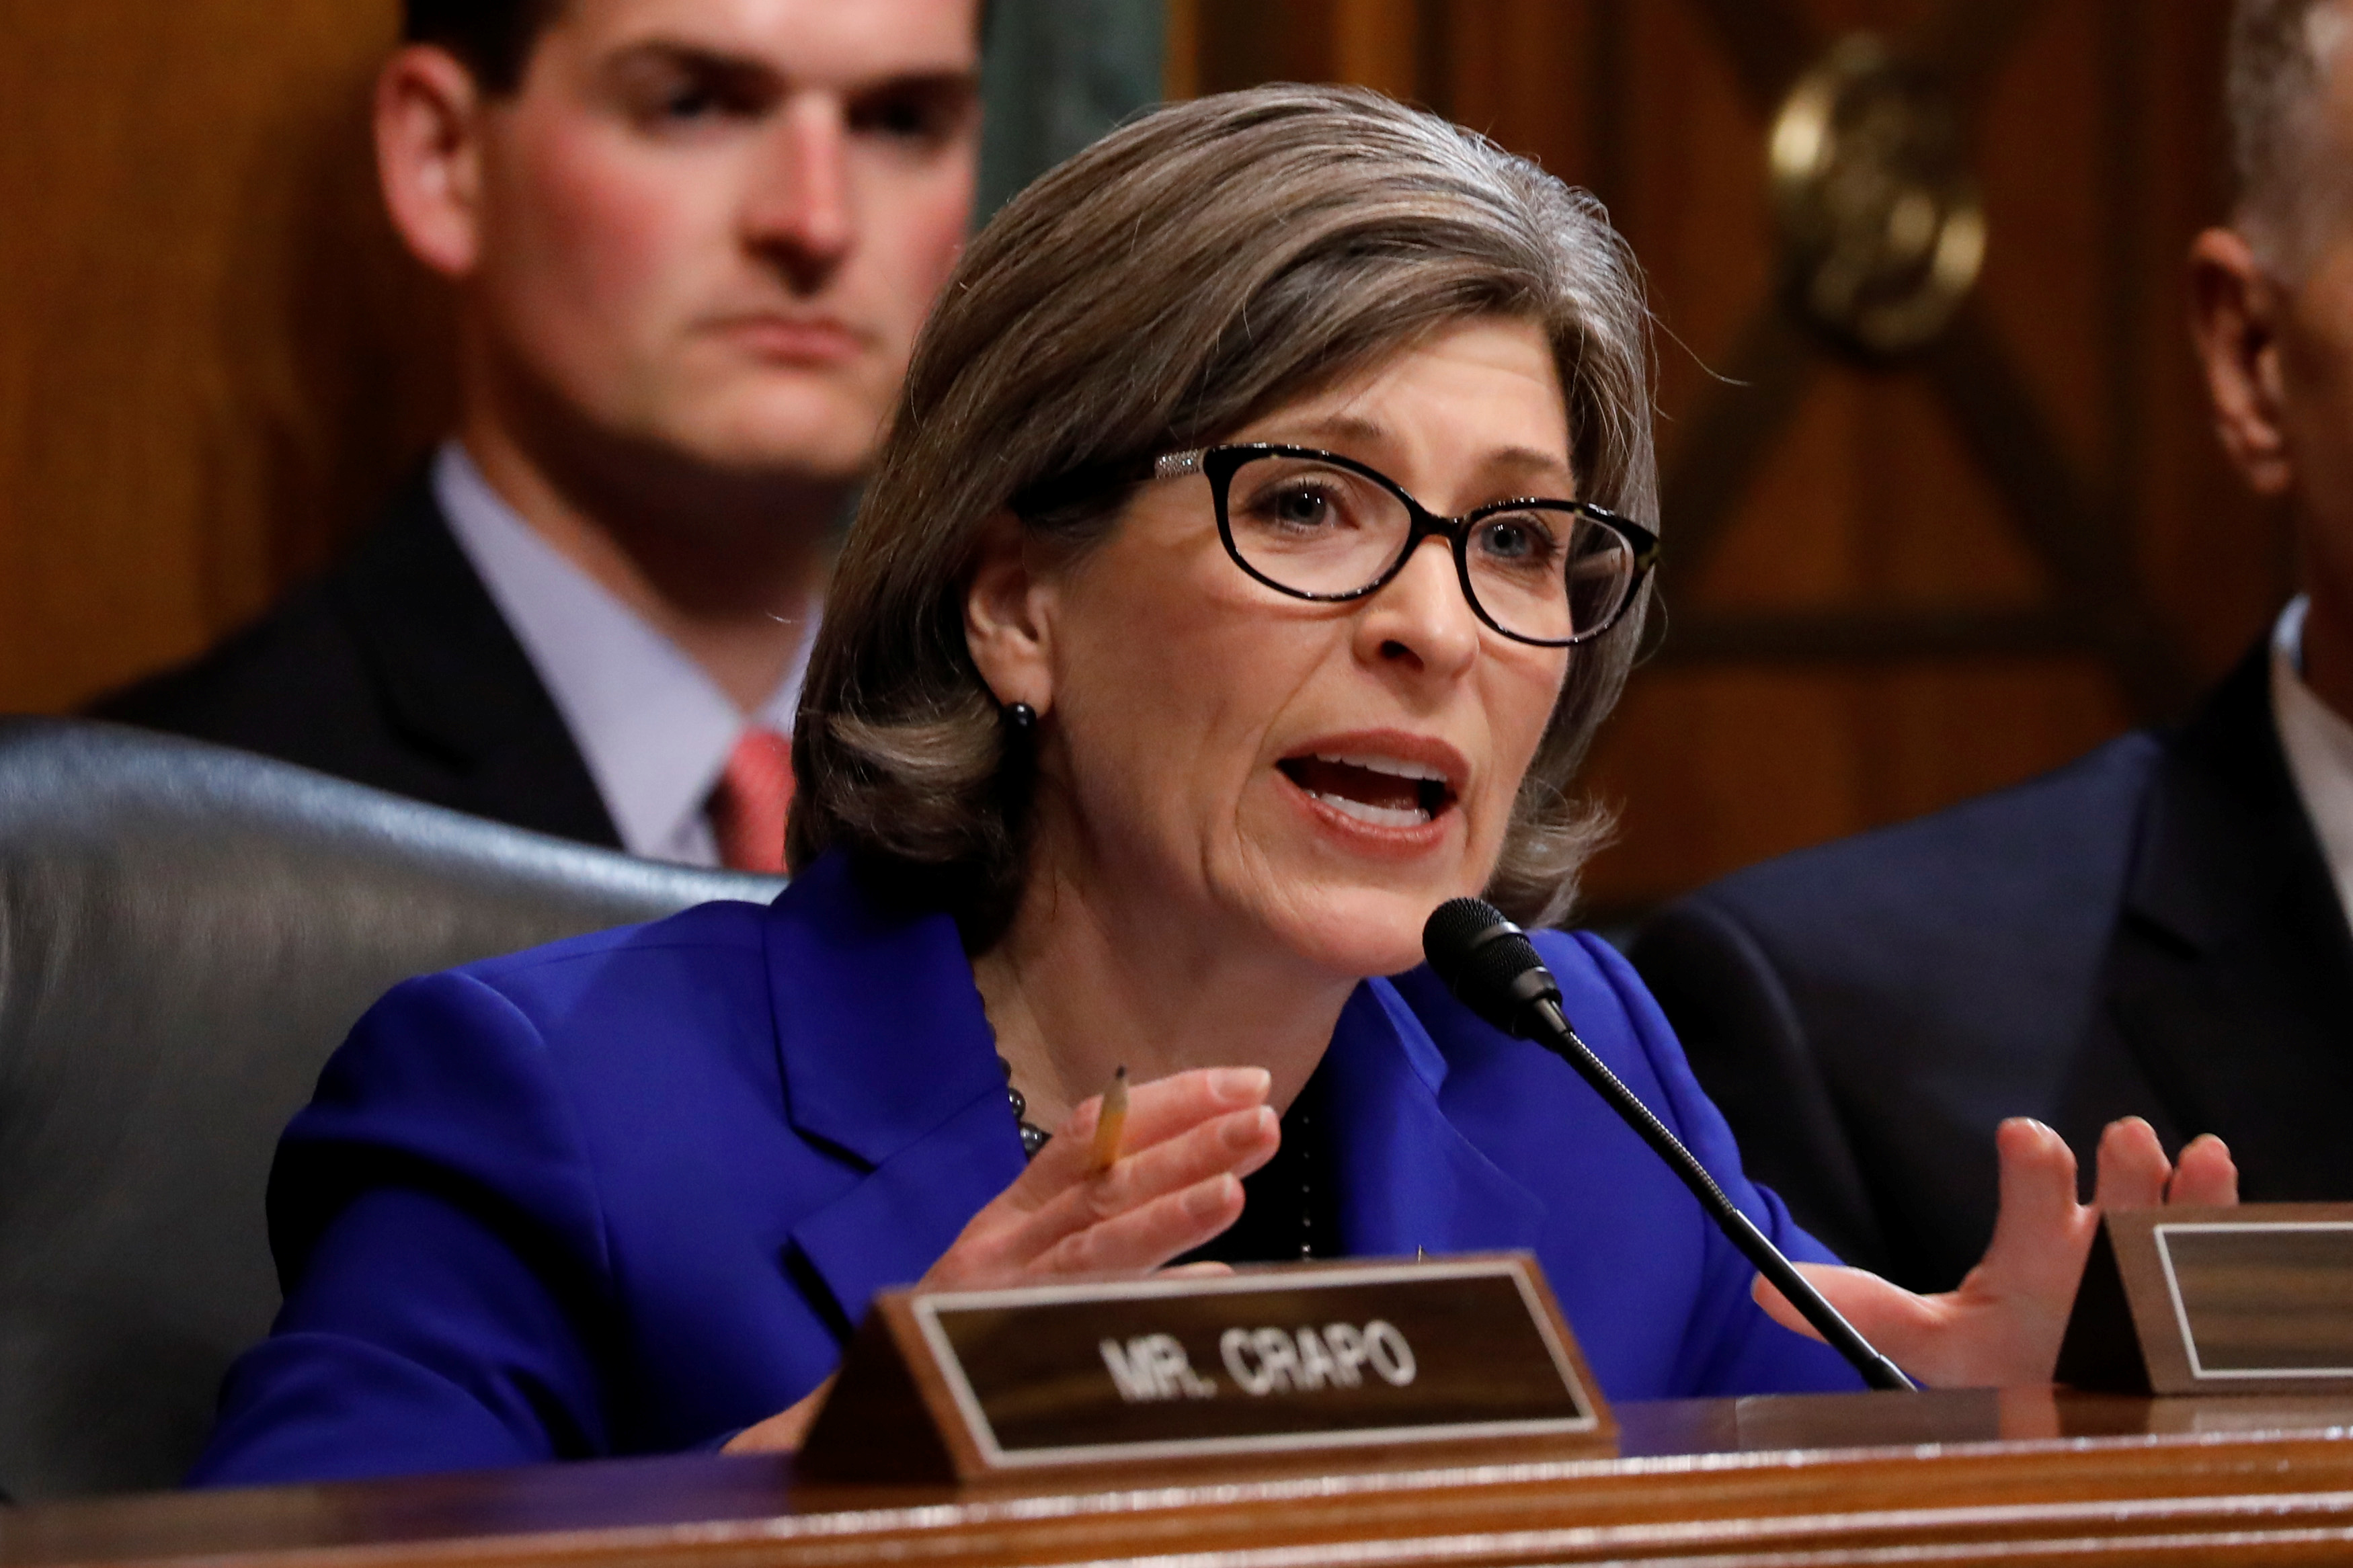 Sen. Joni Ernst (R-IA) asks a question as U.S. Attorney General William Barr testifies before a Senate Judiciary Committee hearing on Capitol Hill in Washington